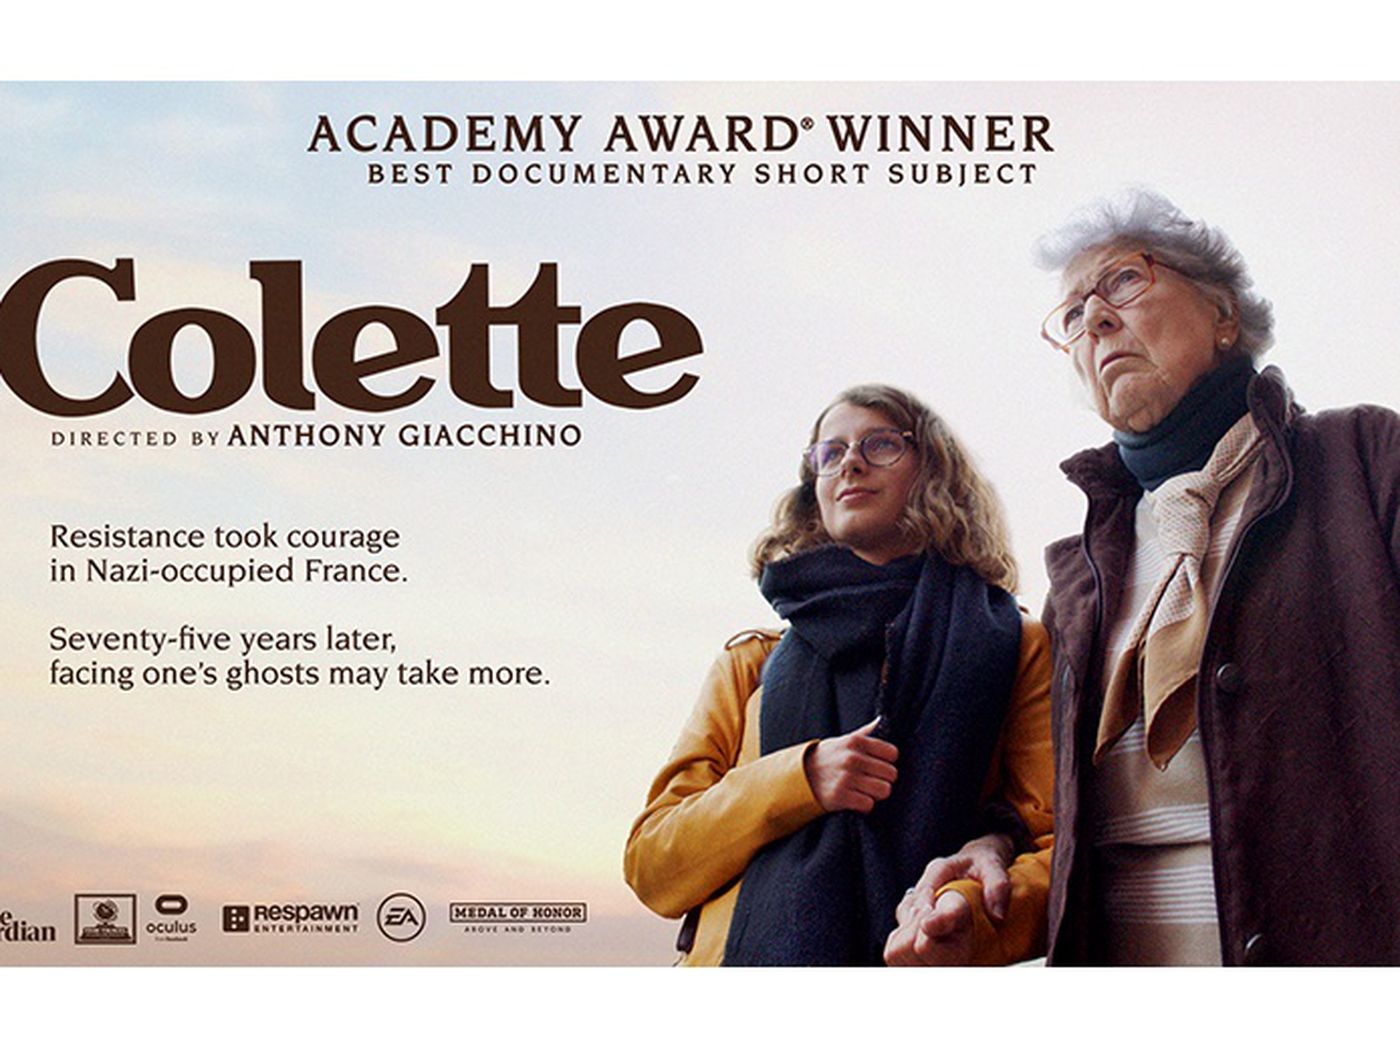 Video game industry dominates first Oscar with documentary short film Colette